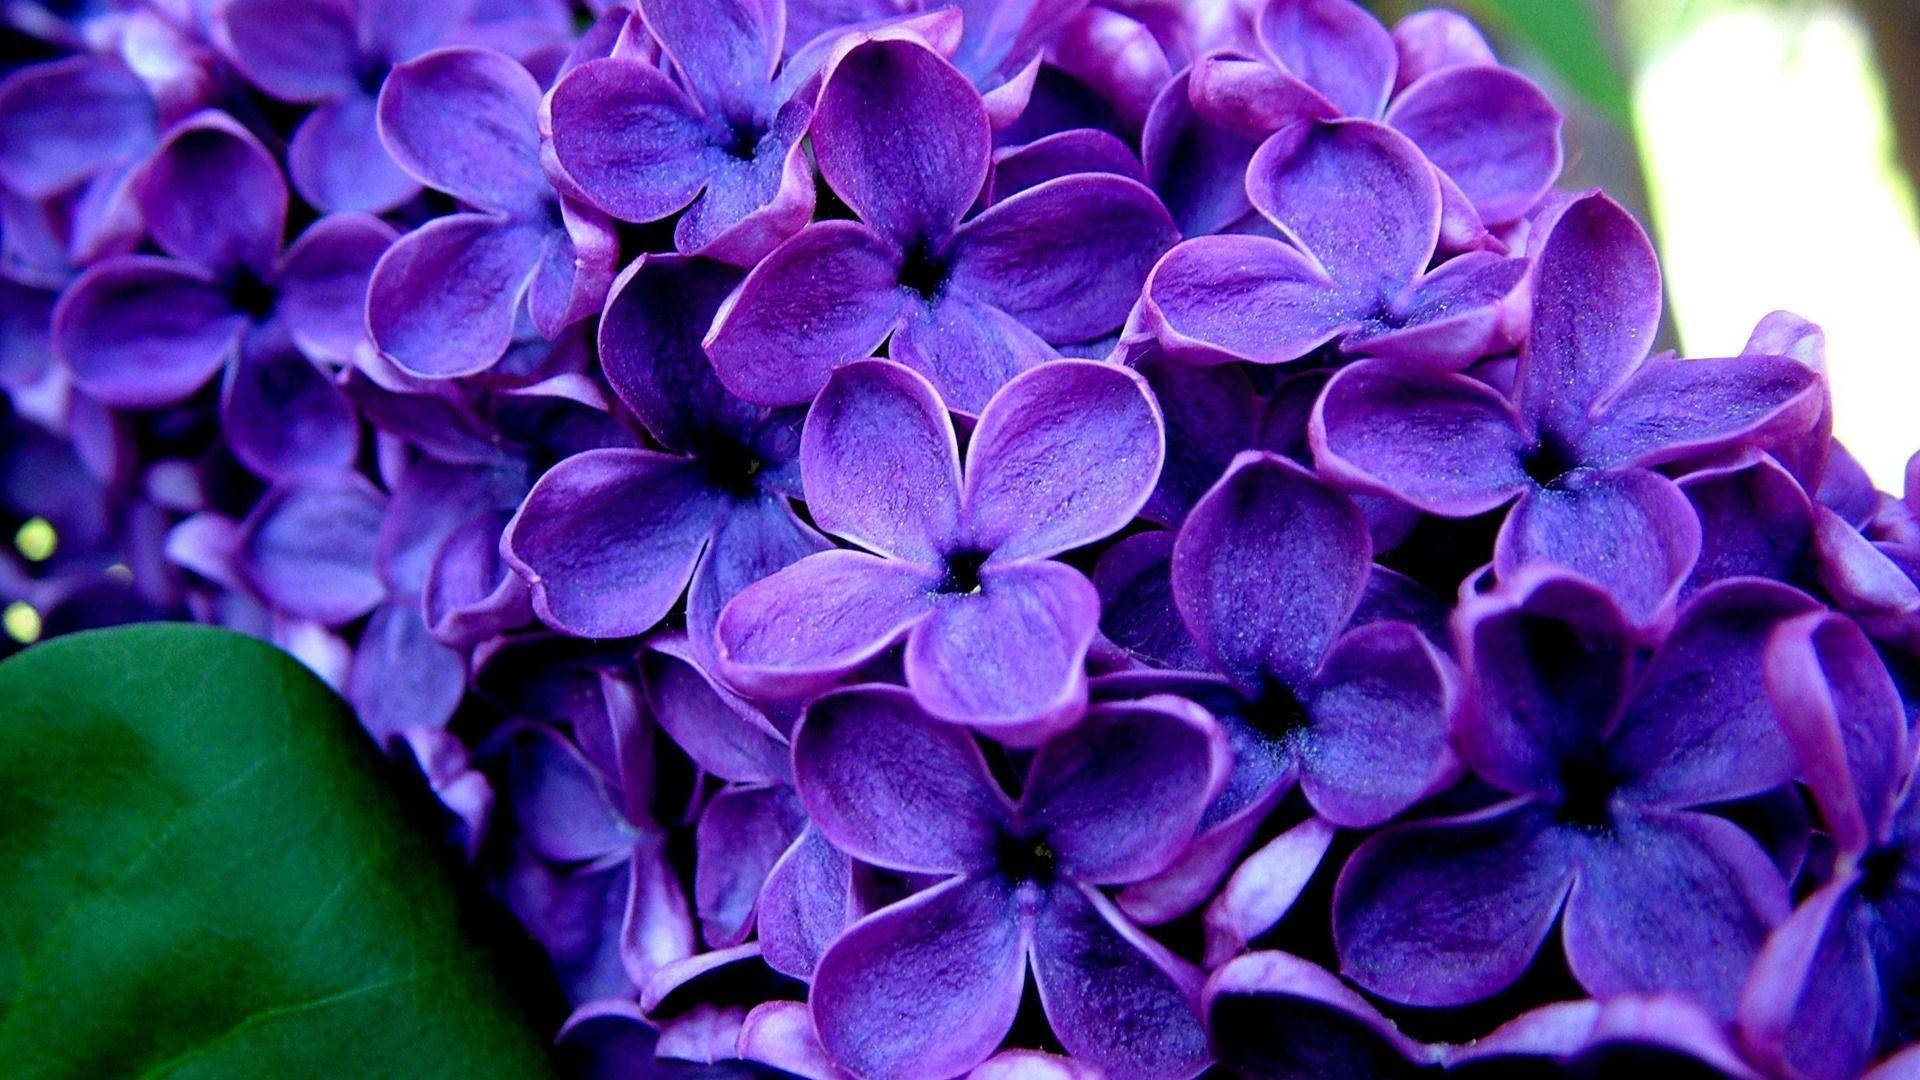 Brighten Your Day with a Colorful Purple Flower Desktop Wallpaper